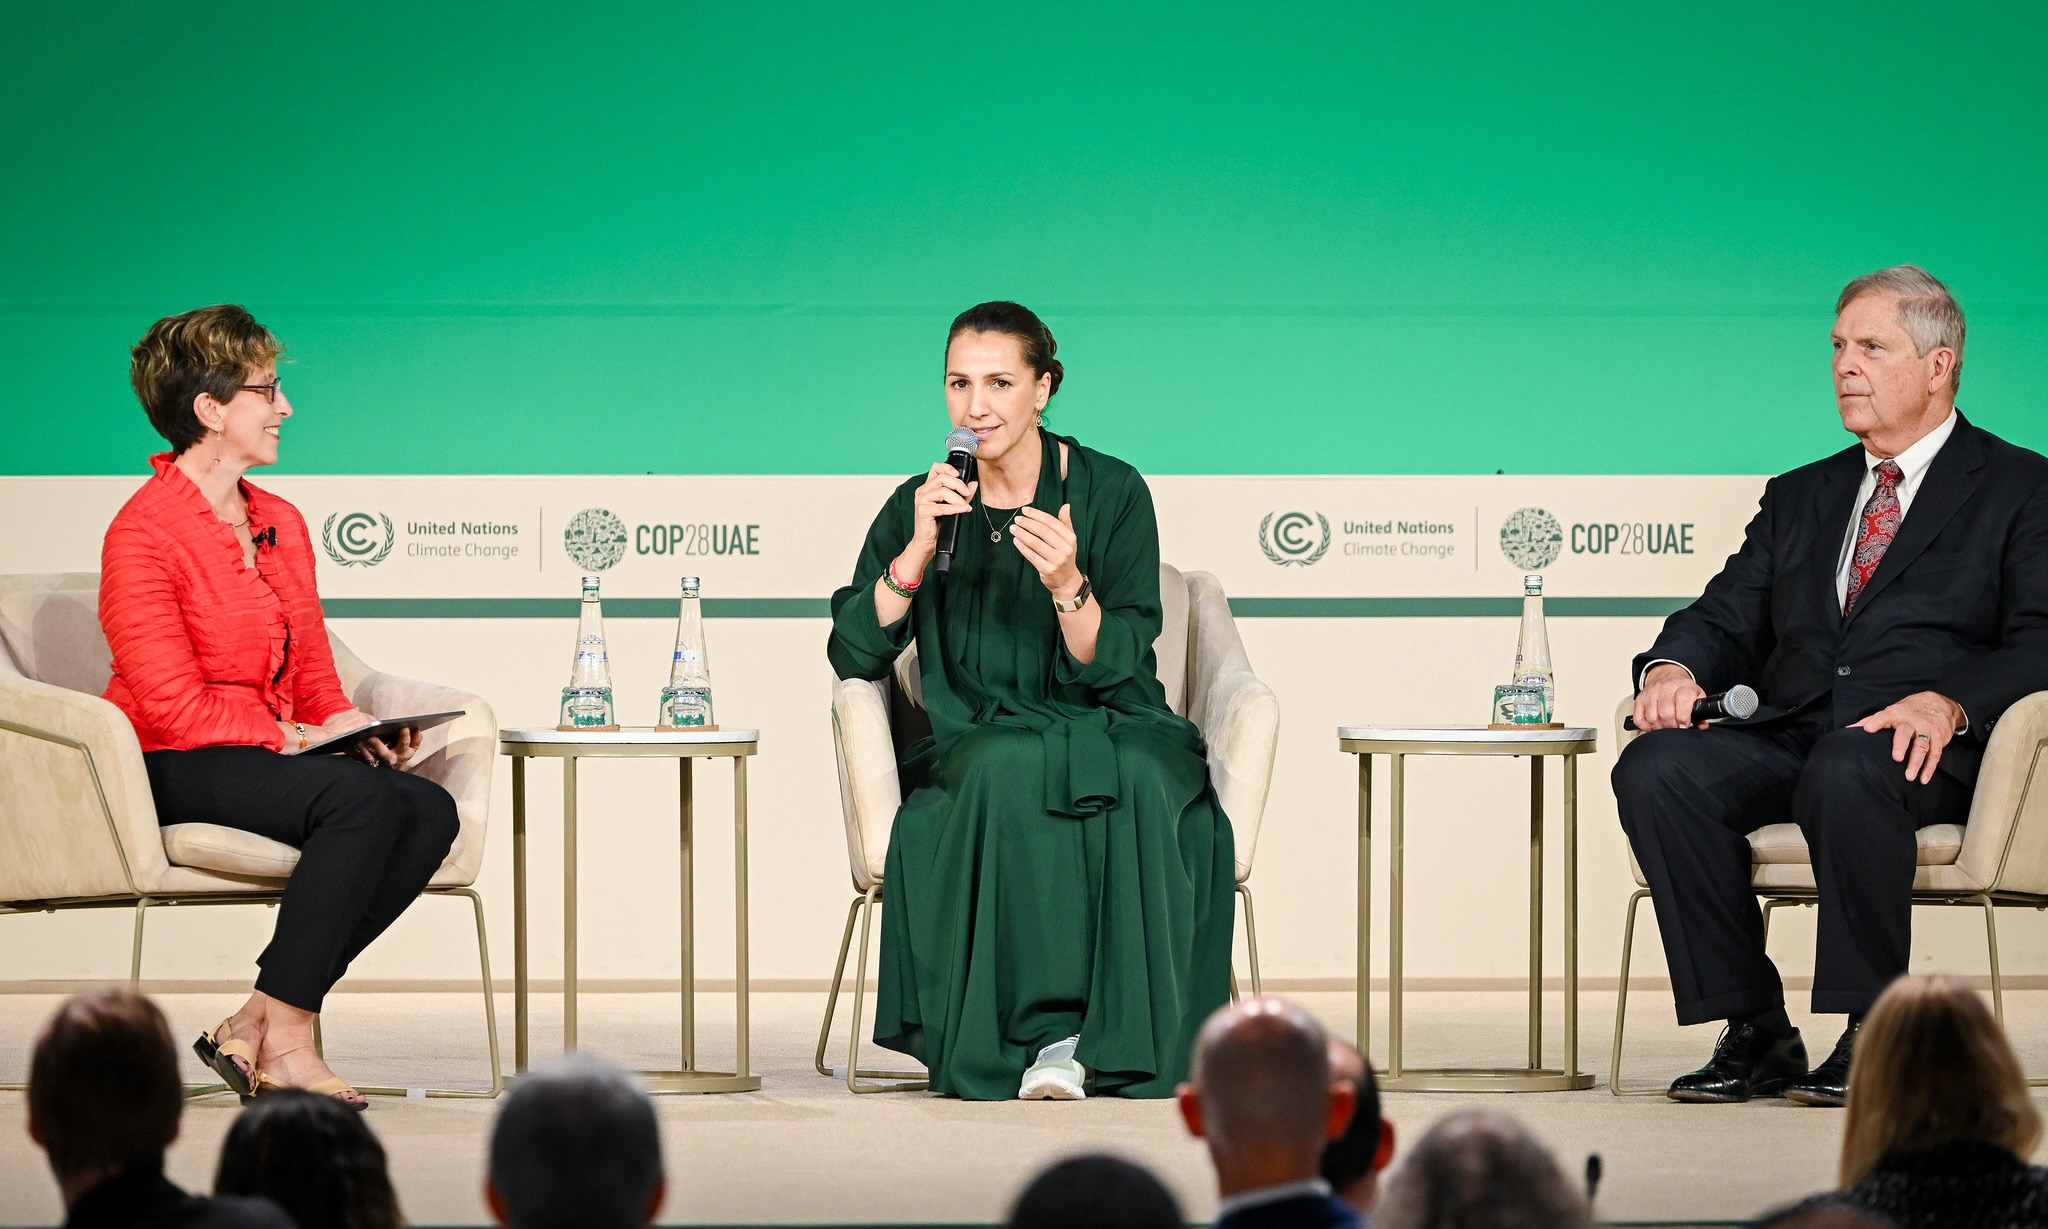 Diane Holdorf, Executive Vice President, WBCSD, USA, H.E. Mariam bint Mohamed Saeed Al Meheiri, UAE Minister of Climate Change and Environment and Tom Vilsack, Secretary of Agriculture, USA sit in chairs during a panel discussion against a green backdrop at the U.N. climate talks in Dubai.